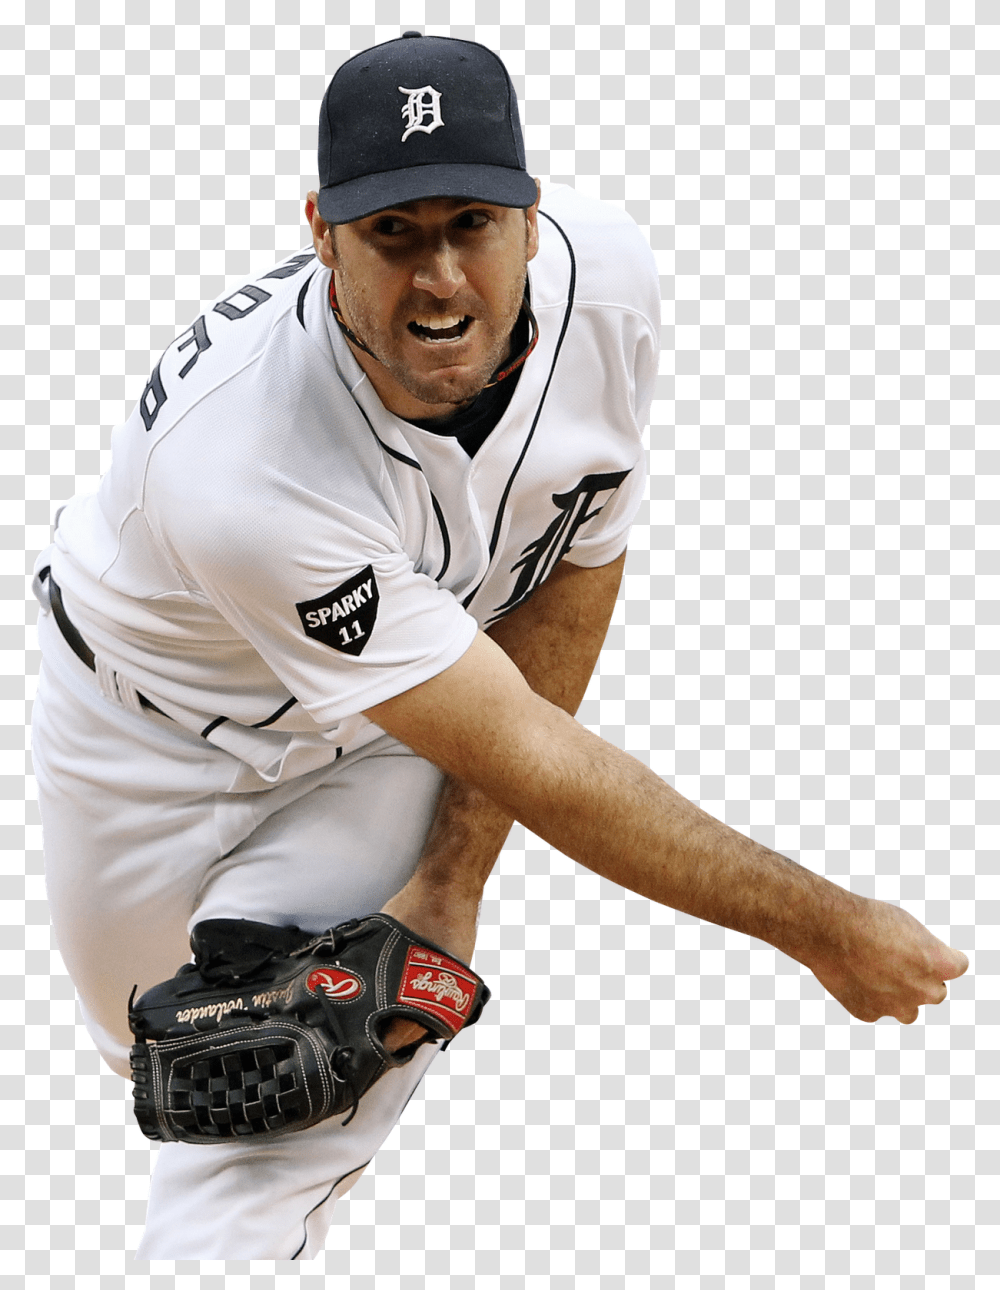 Baseball Player Image Purepng Fr 403174 Baseball Pitcher Background, Clothing, Apparel, People, Person Transparent Png